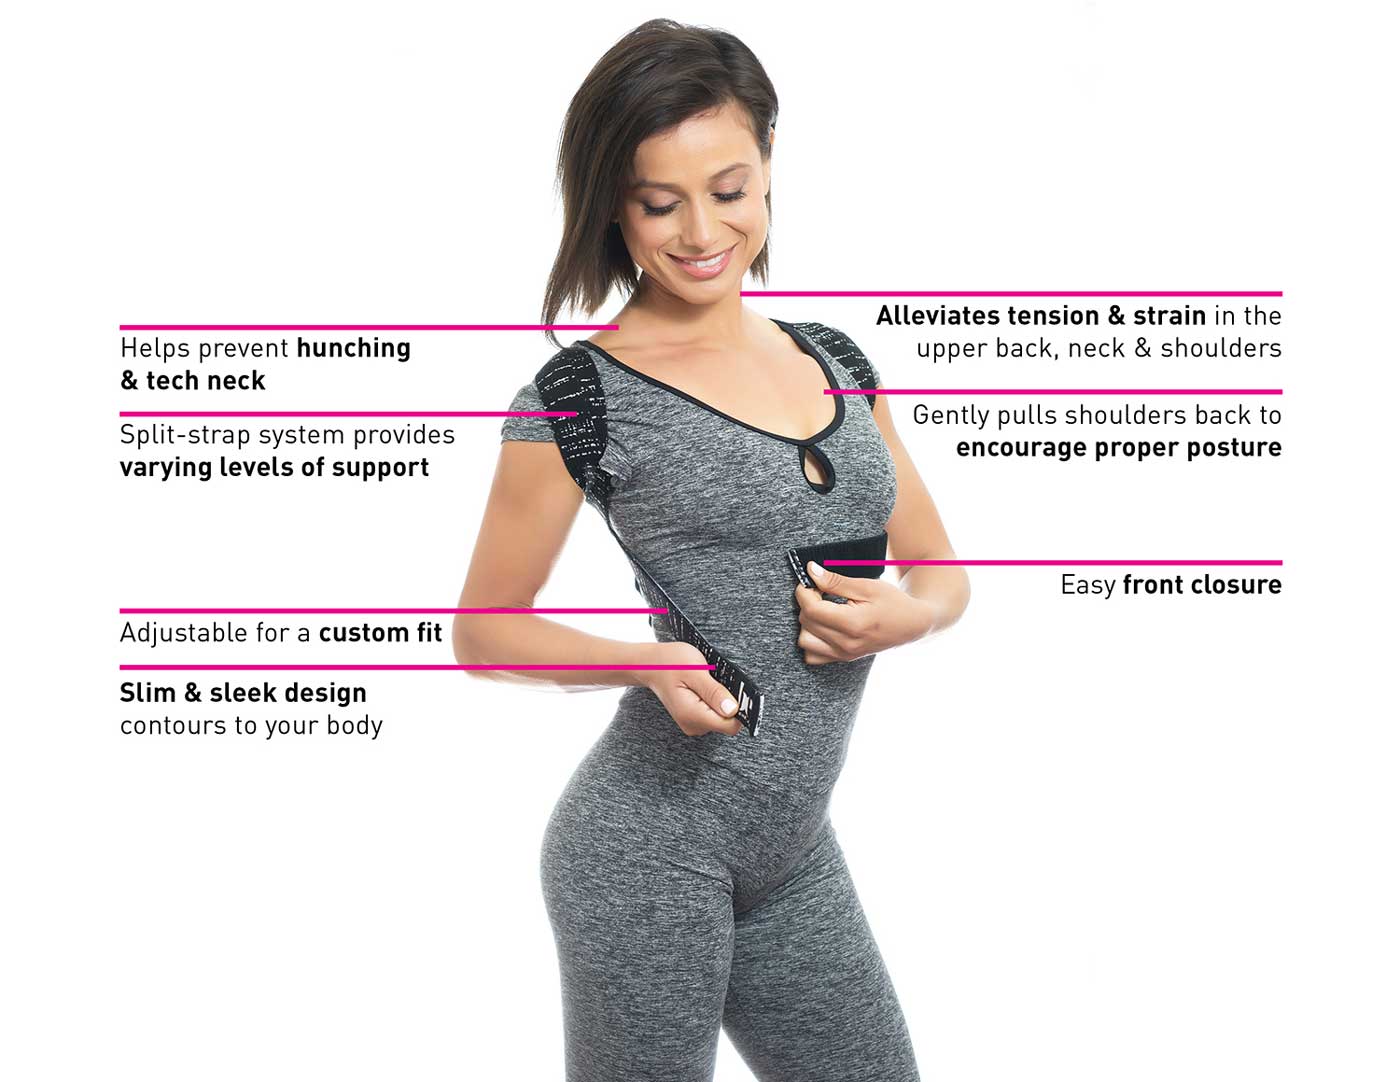 How to have good posture? Wearing BackEmbrace on a regular basis is a great way to avoid posture problems and enjoy the benefits of good posture. The BackEmbrace posture corrector device helps prevent hunching and tech neck while also alleviating tension and strain in the upper back, neck, and shoulders. The posture trainer has a slim and sleek design that contours to your body and is adjustable for a custom fit. The split-strap system provides varying levels of support as it gently pulls shoulders back to encourage healthy posture. And only the best posture corrector device has an easy front closure design making it fast and easy to wear on the go.